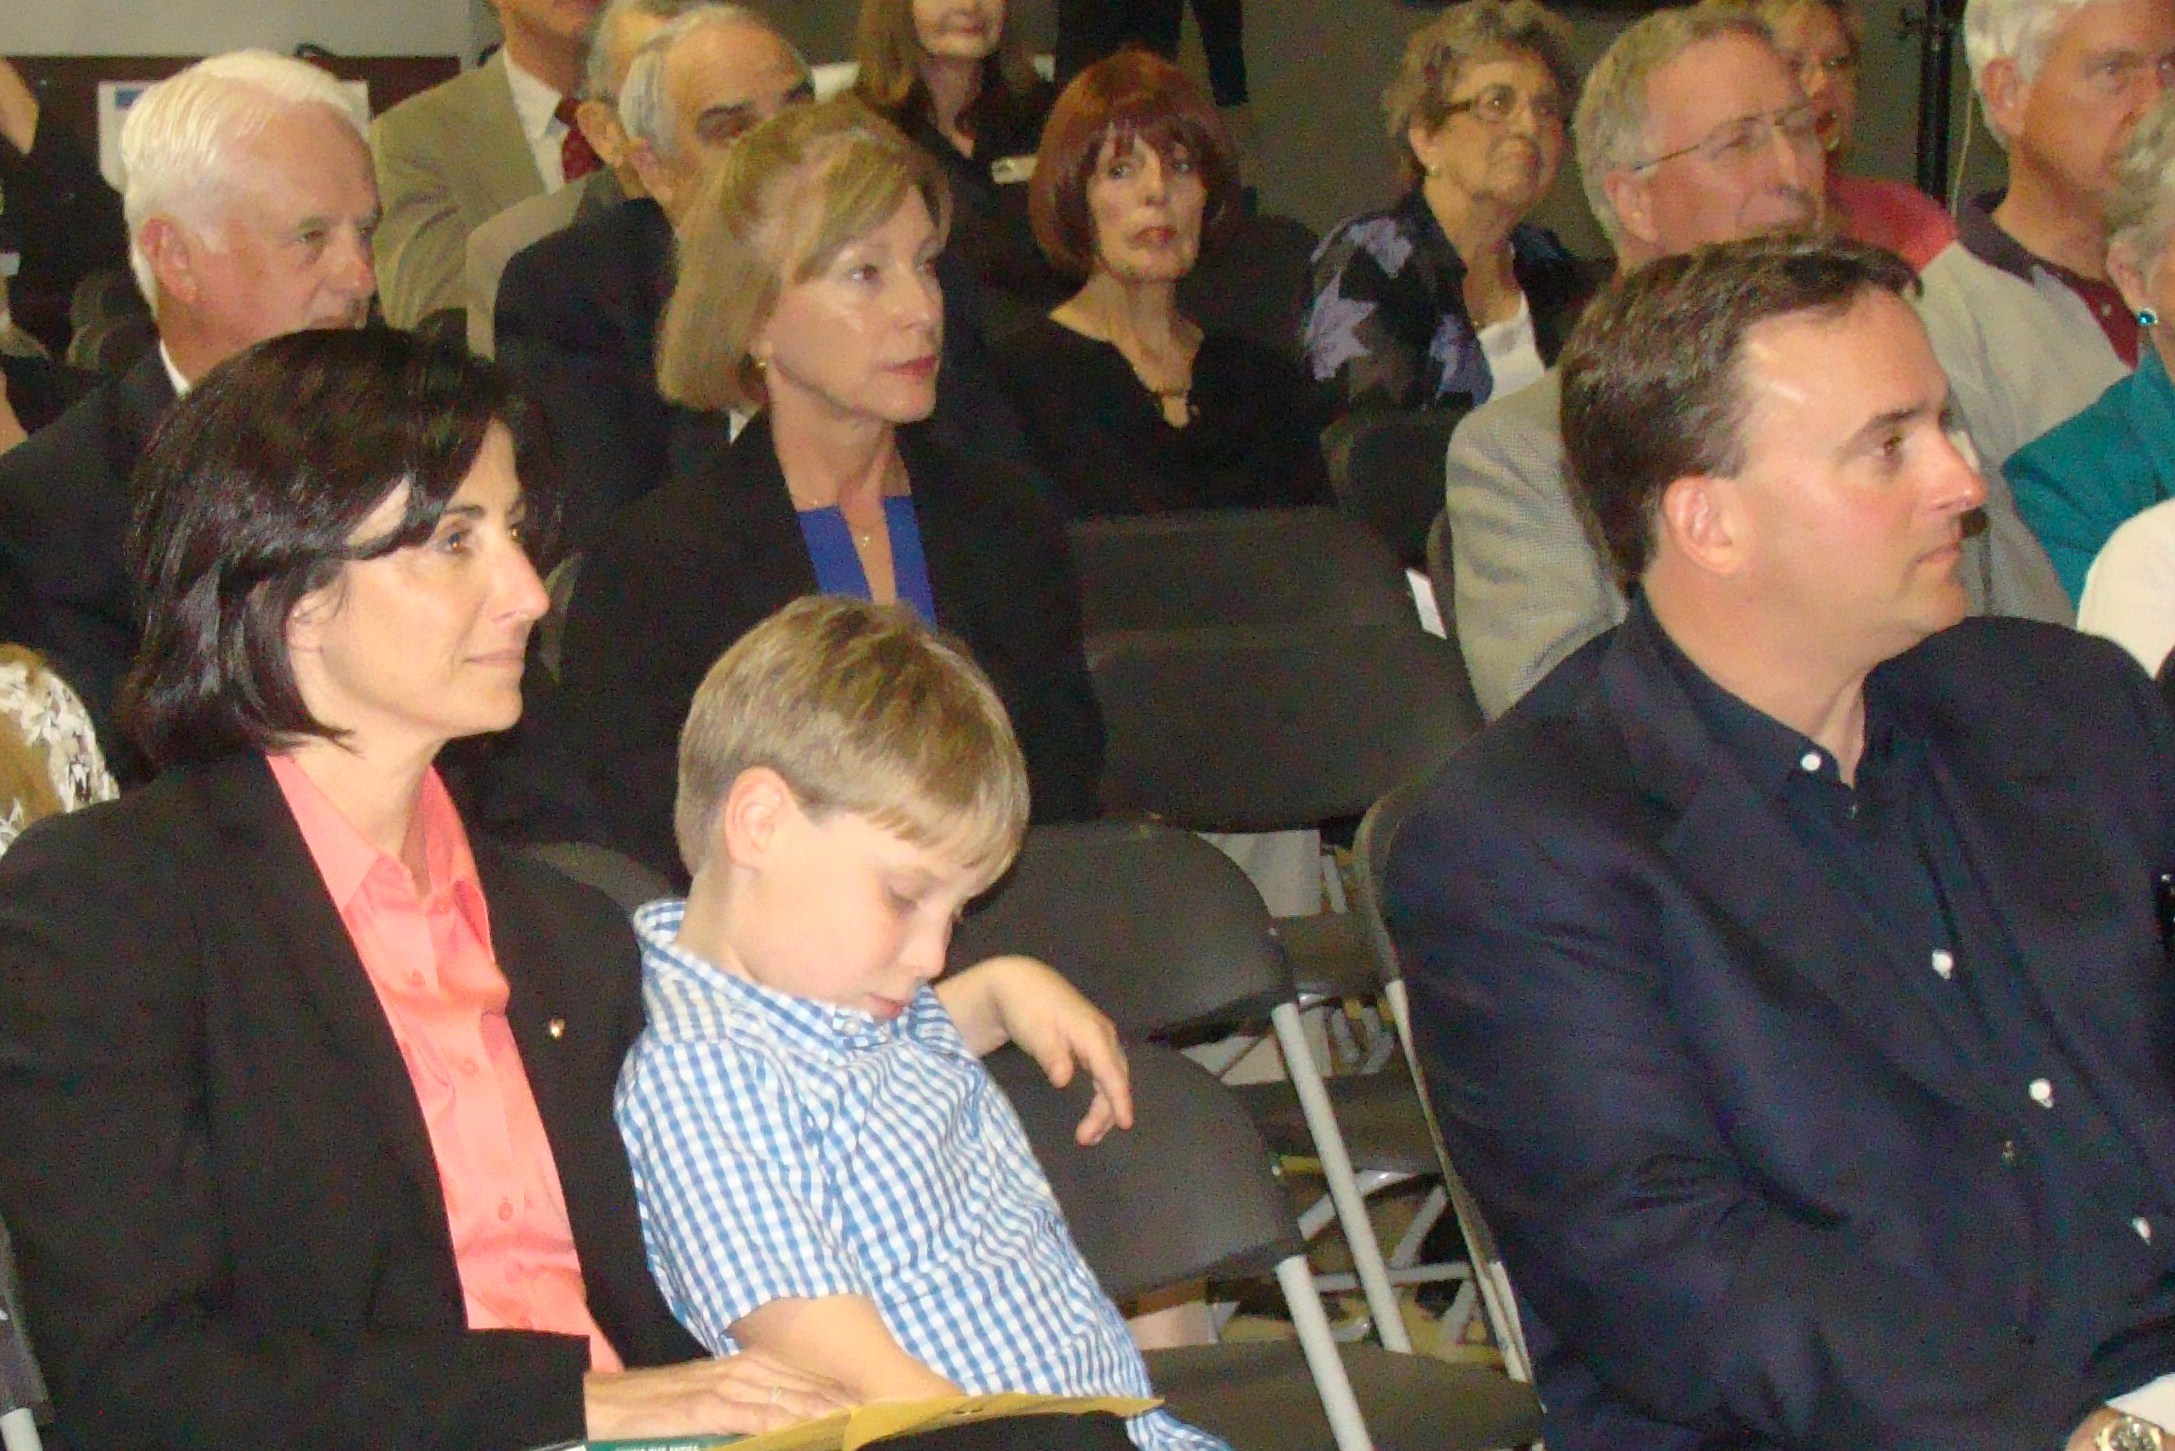 Nicole Stott and Family watching her Introduction, 28 Jan '12.JPG